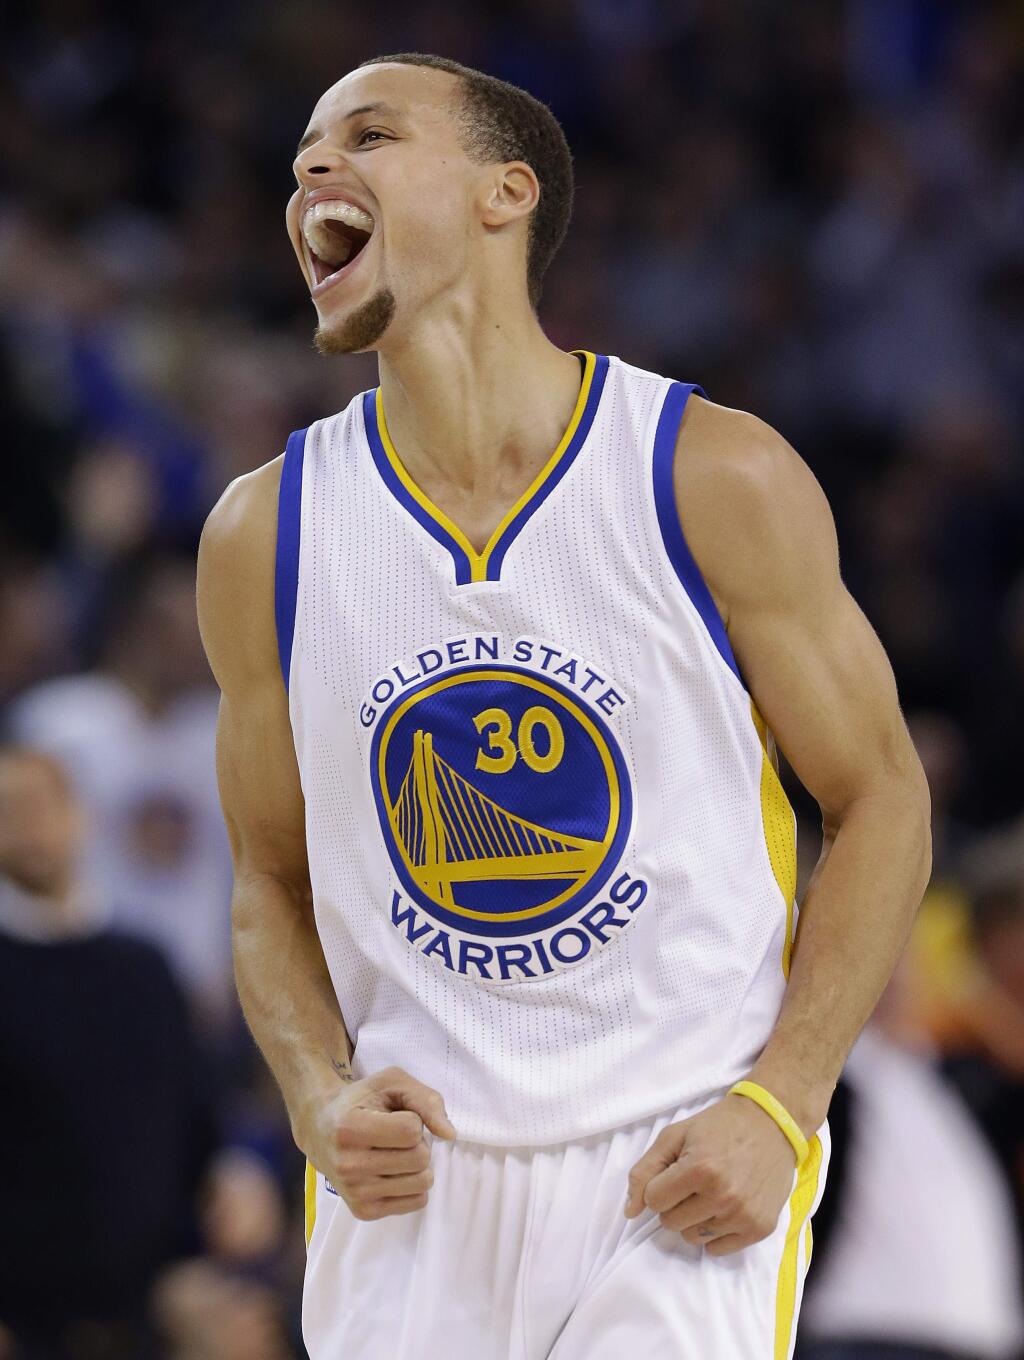 Golden State Warriors guard Stephen Curry (30) celebrates after scoring against the Houston Rockets during the first half of an NBA basketball game in Oakland, Wednesday, Jan. 21, 2015. (AP Photo/Jeff Chiu)